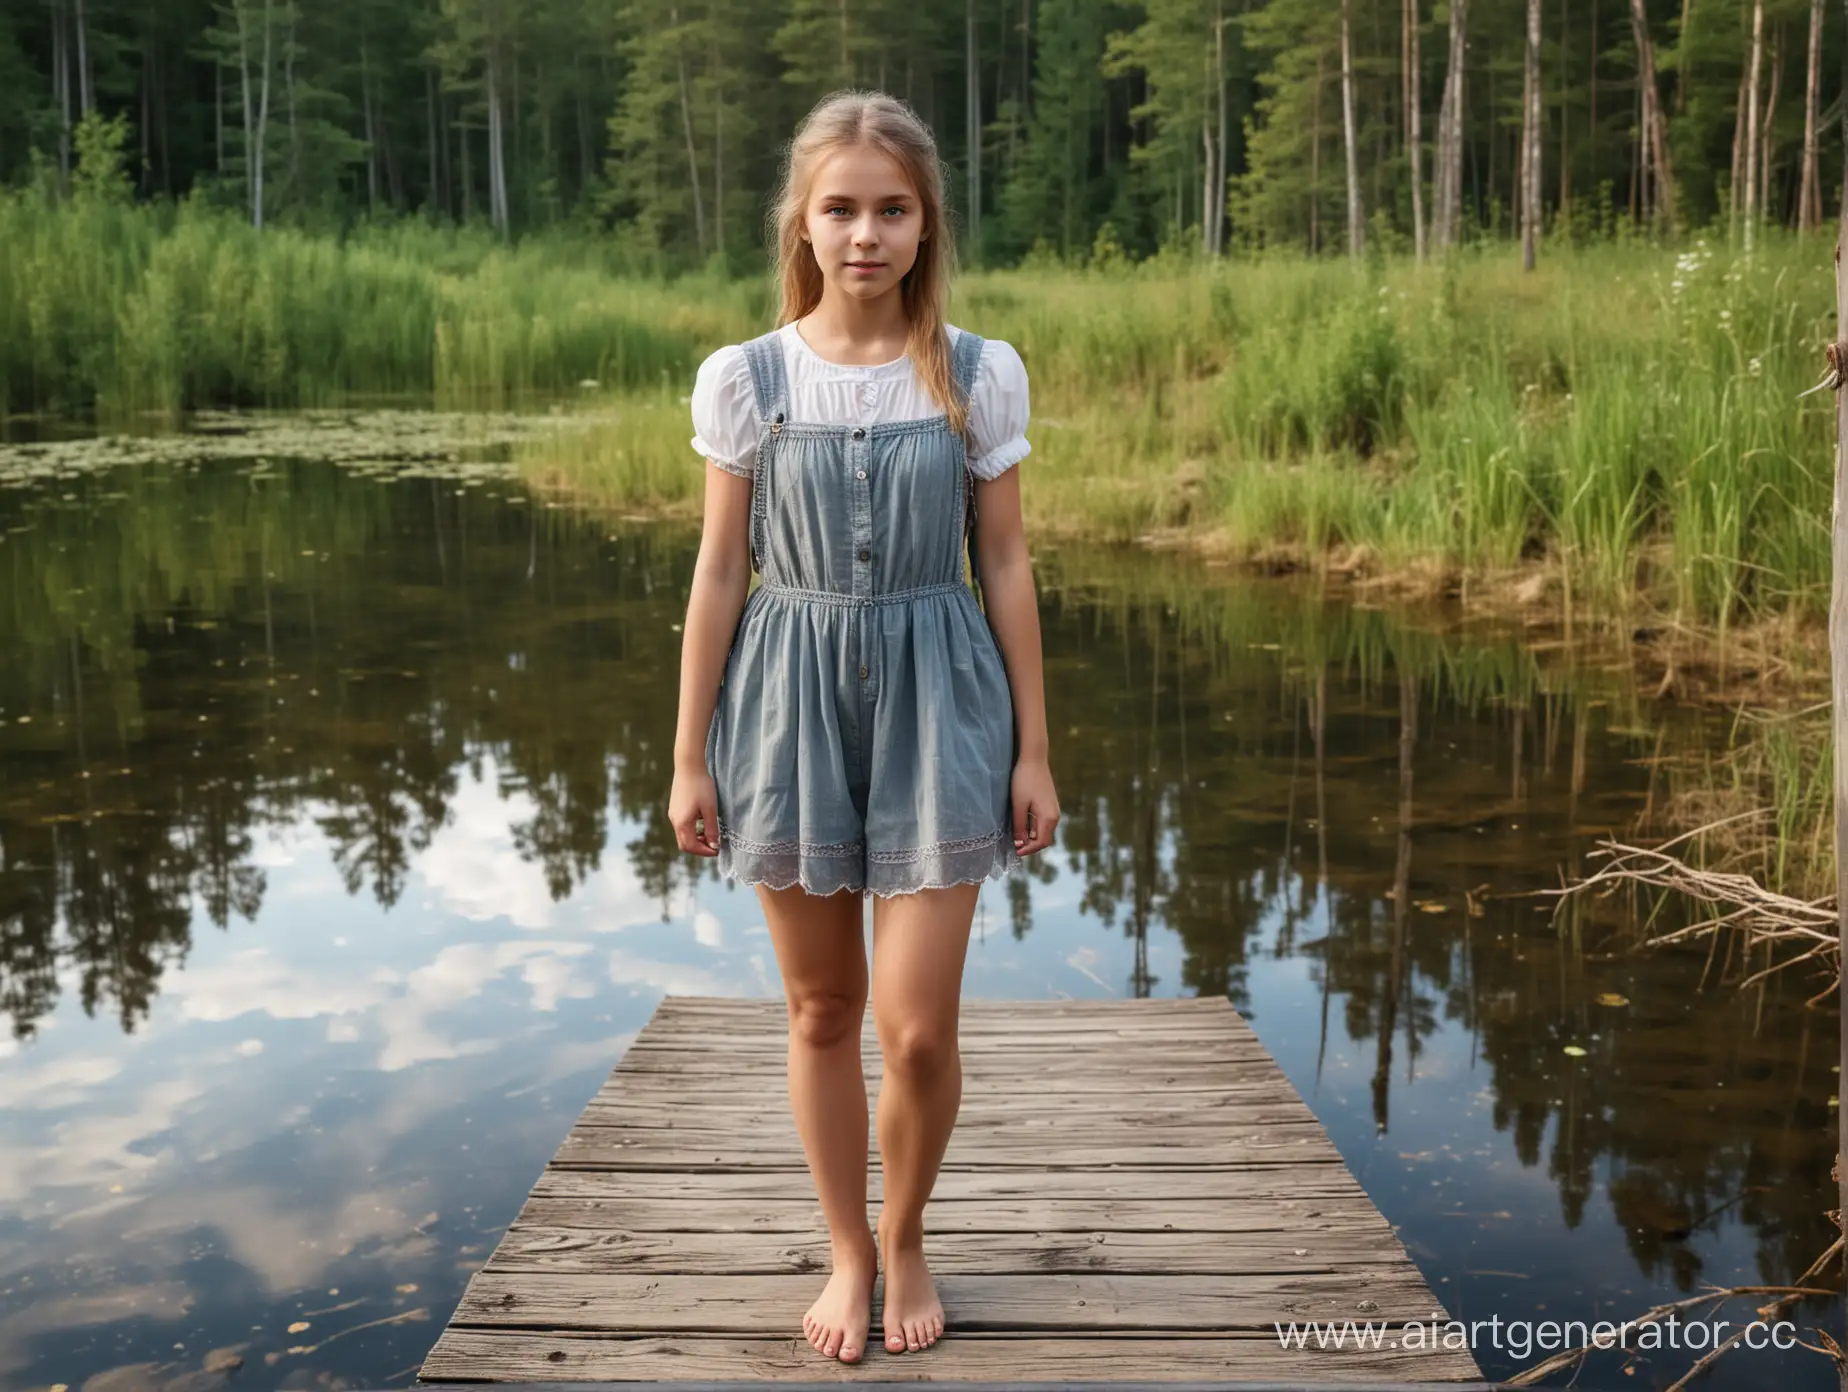 Russian-Girl-Standing-on-Wooden-Bridge-by-Beautiful-Forest-Lake